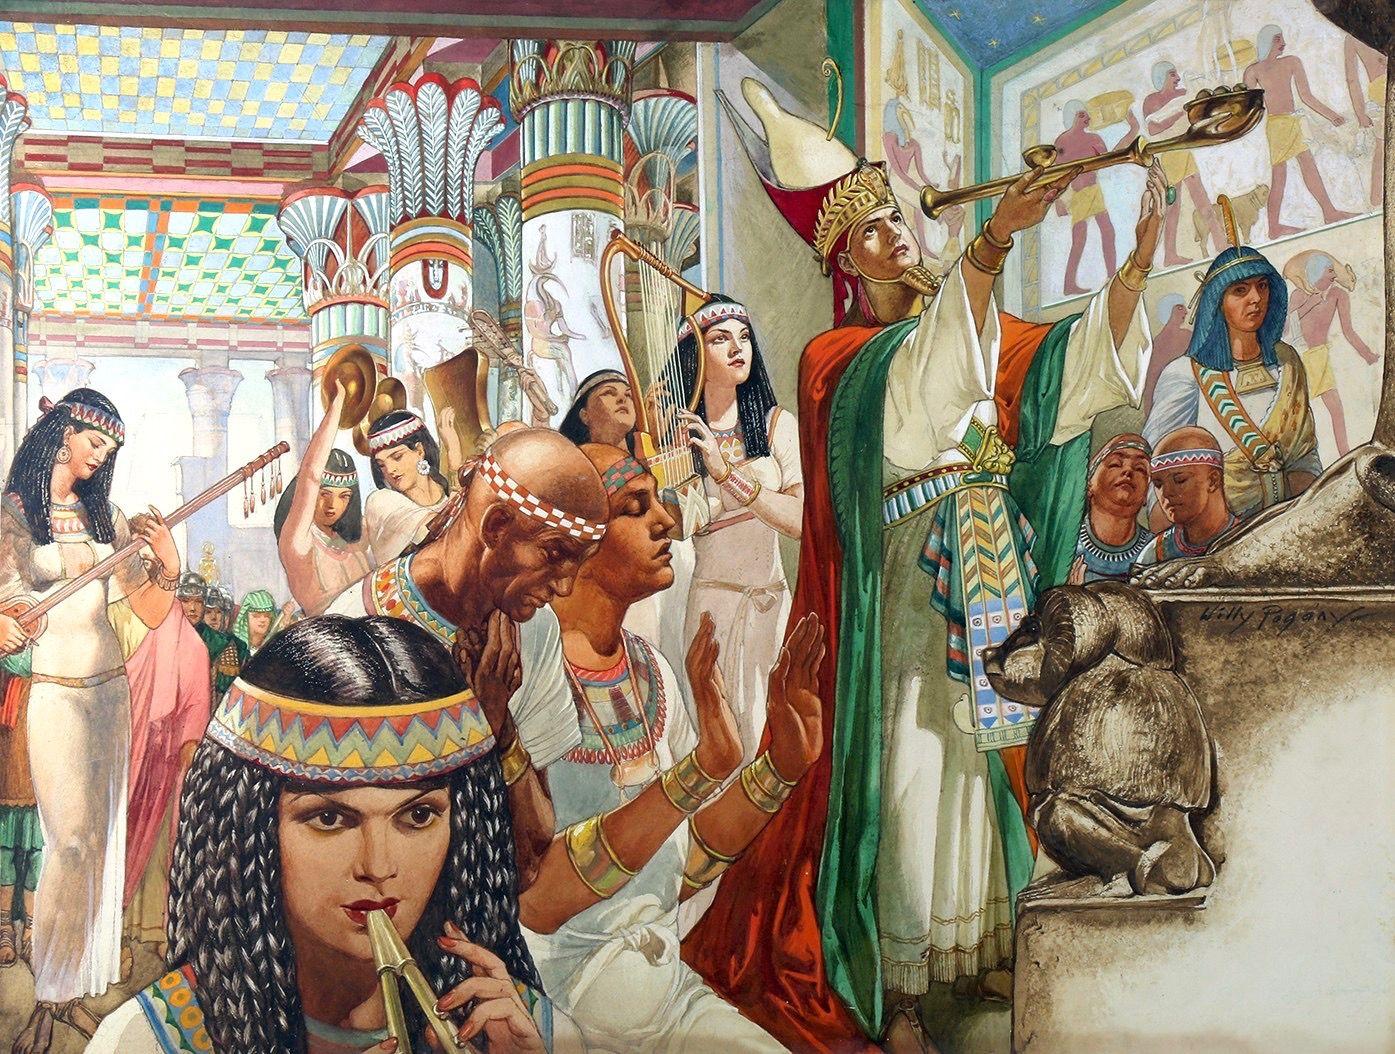 Willy Pogany Figurative Art - Nero's Temple On The Nile